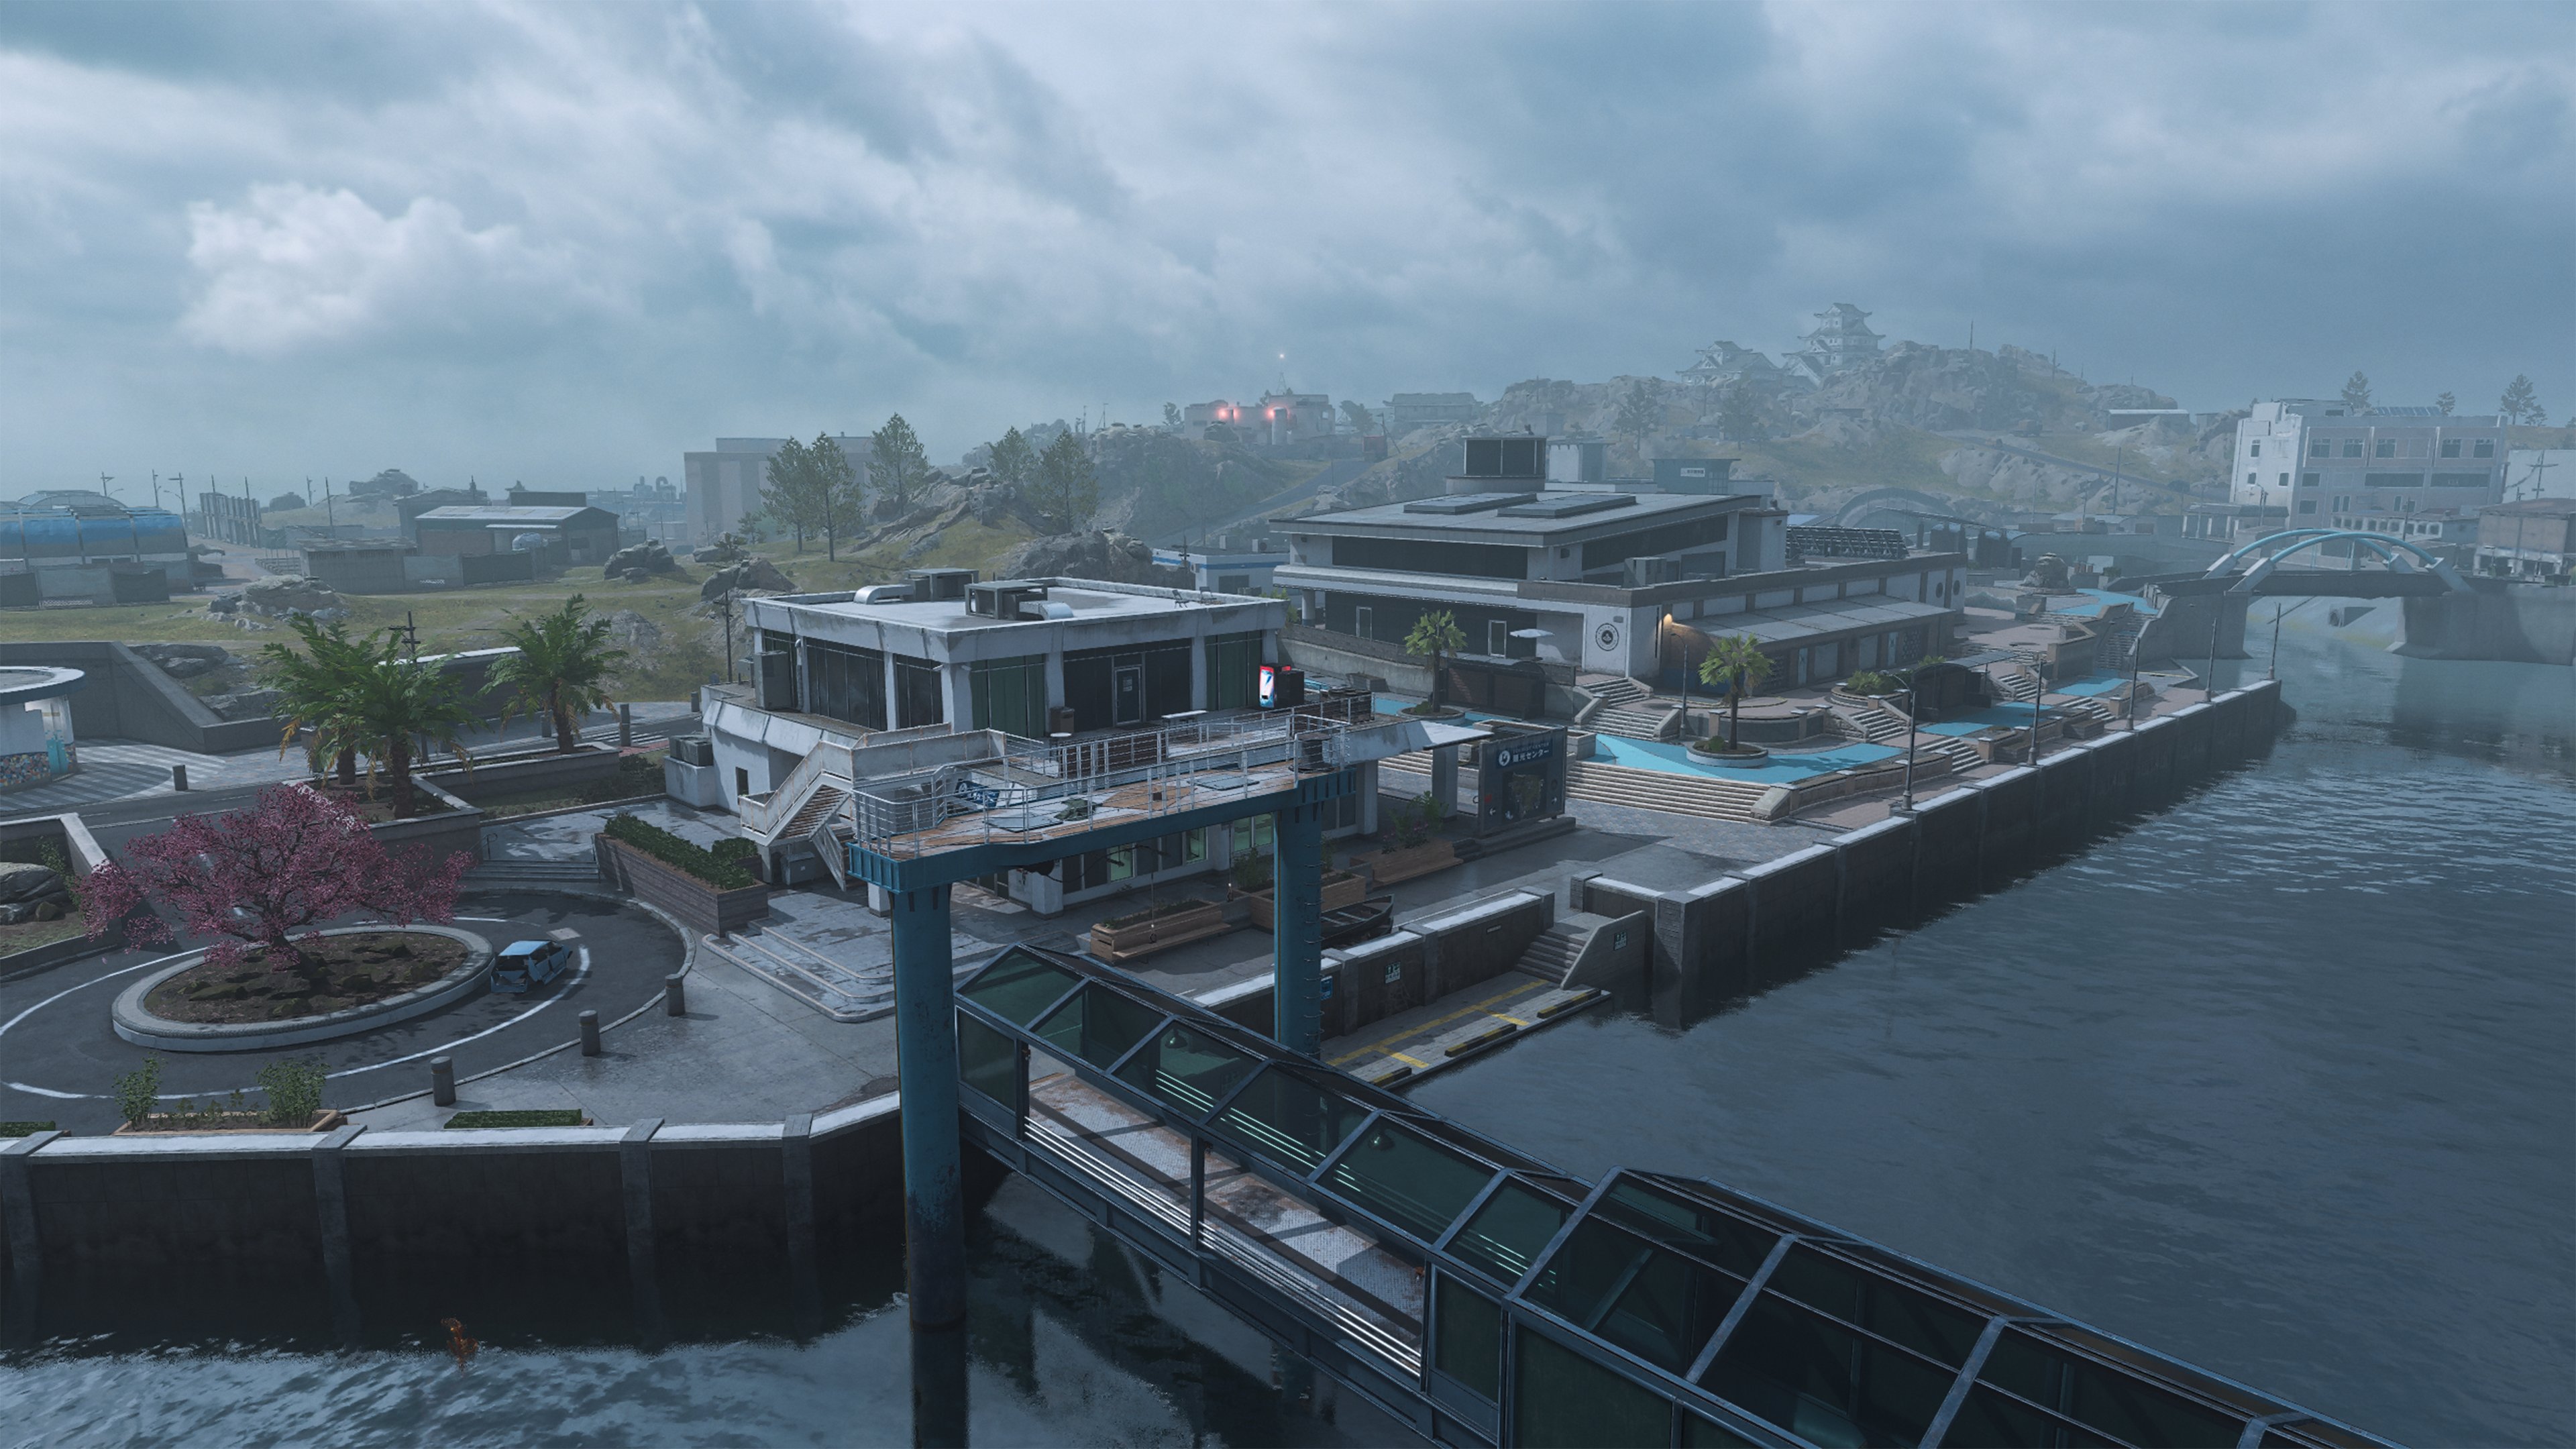 Call of Duty: MWII/Warzone 2.0 Season 2 Adds Resurgence with a New Map, 6  LTM Modes, More